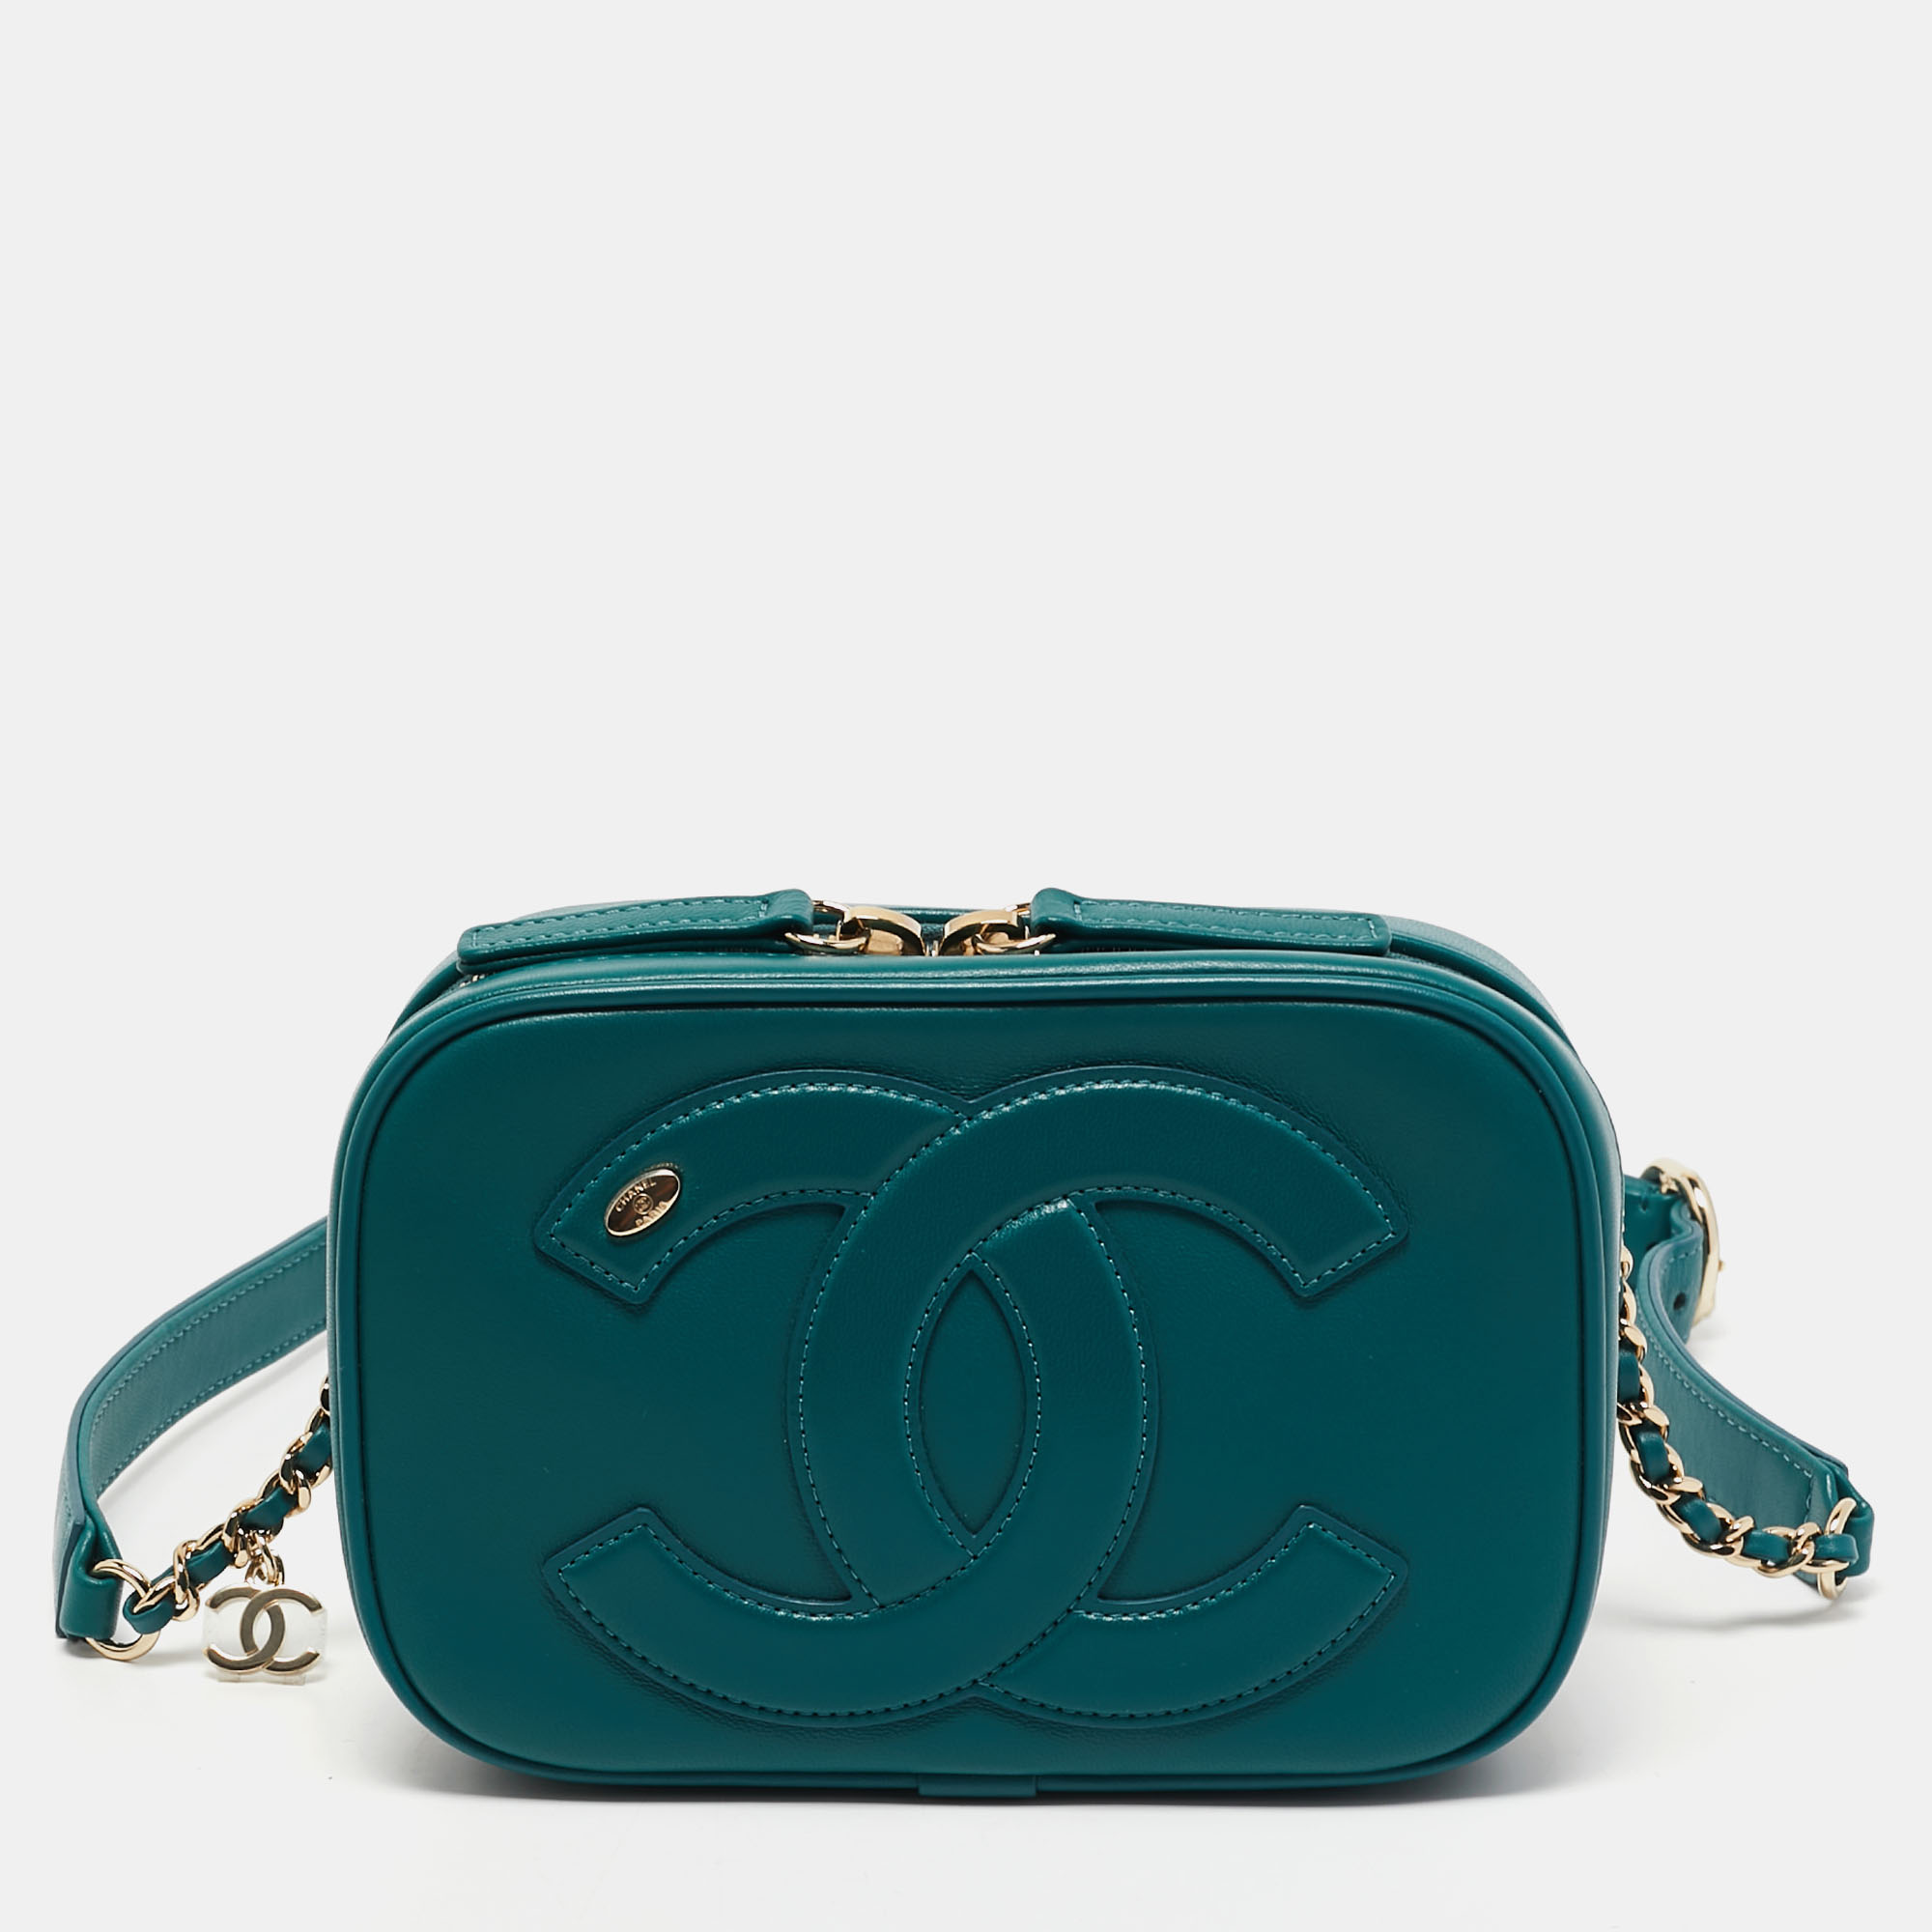 Pre-owned Chanel Green Leather Cc Mania Waist Bag